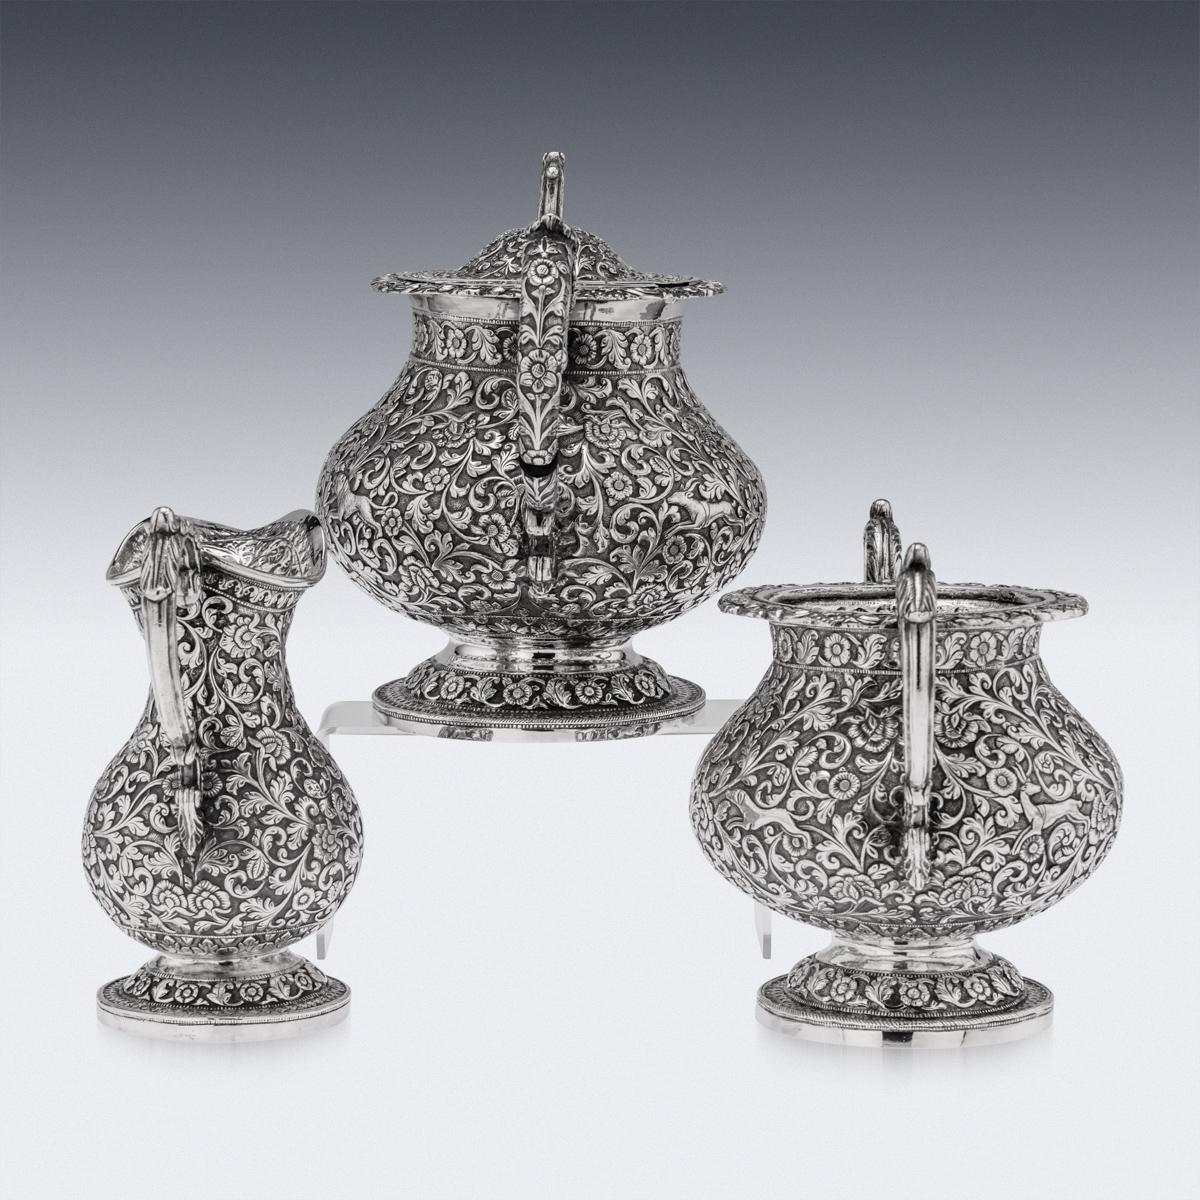 Antique 19th century Indian exceptional solid silver repousse three piece tea set, of pear shape, comprising of a teapot, sugar bowl and cream jug, each piece is profusely and beautifully repousse' decorated with dense scrolling foliage and flowers